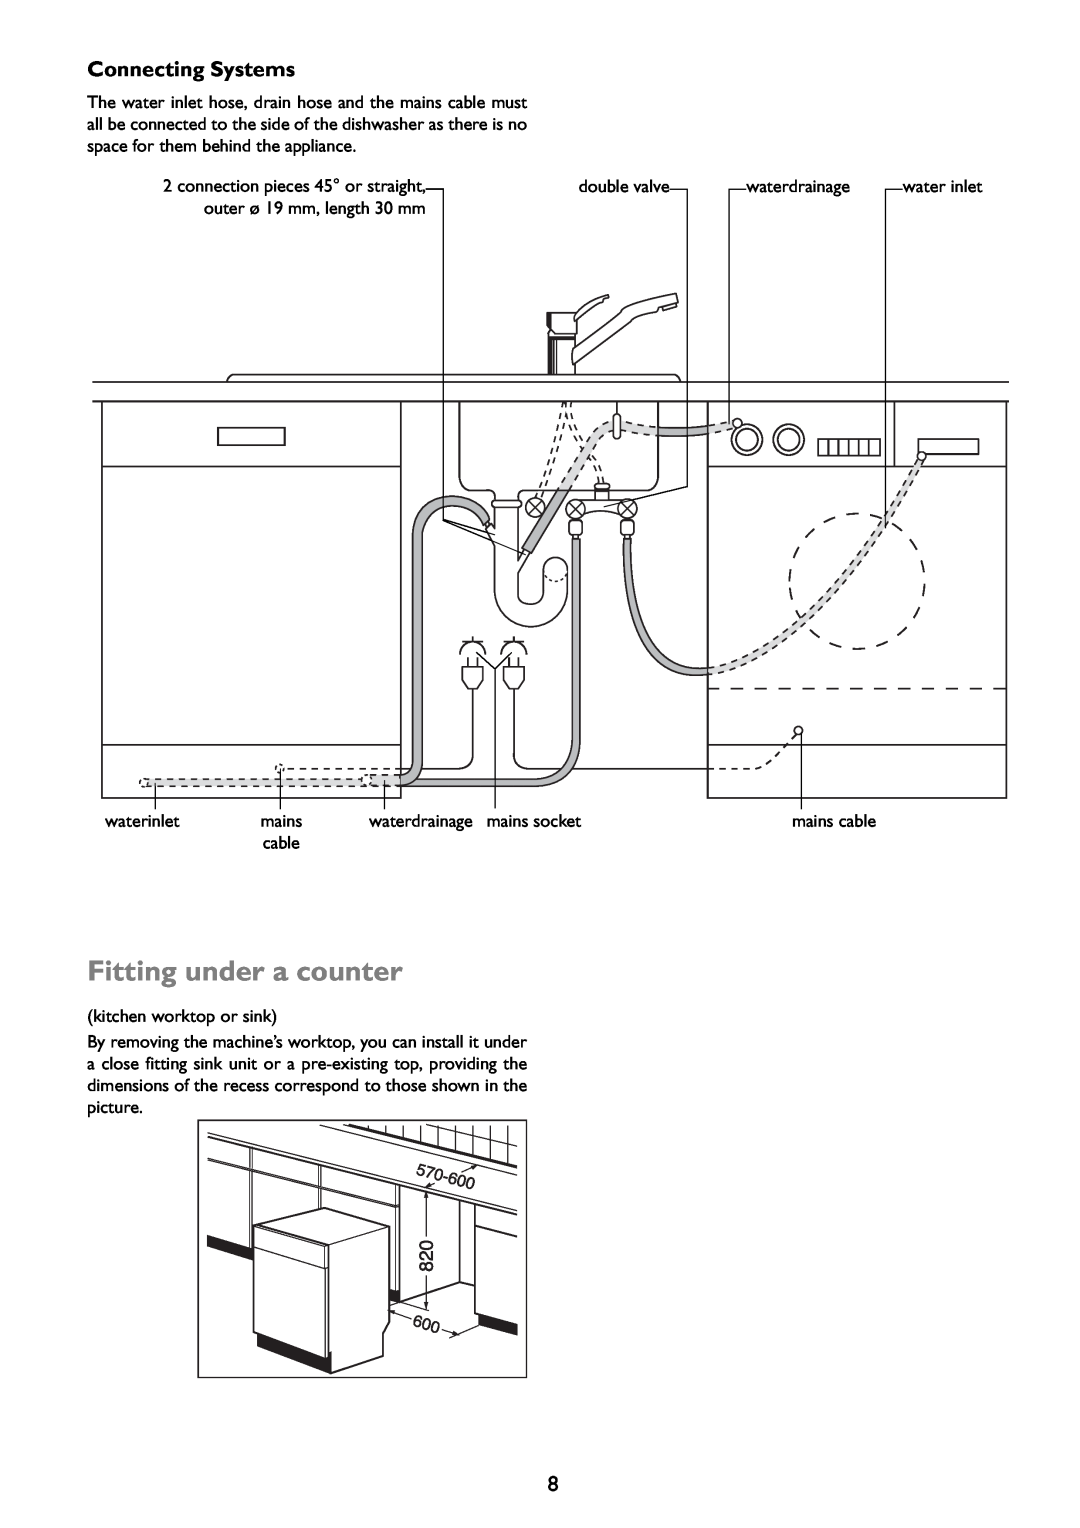 John Lewis JLDWW 1203 instruction manual Fitting under a counter, Connecting Systems 